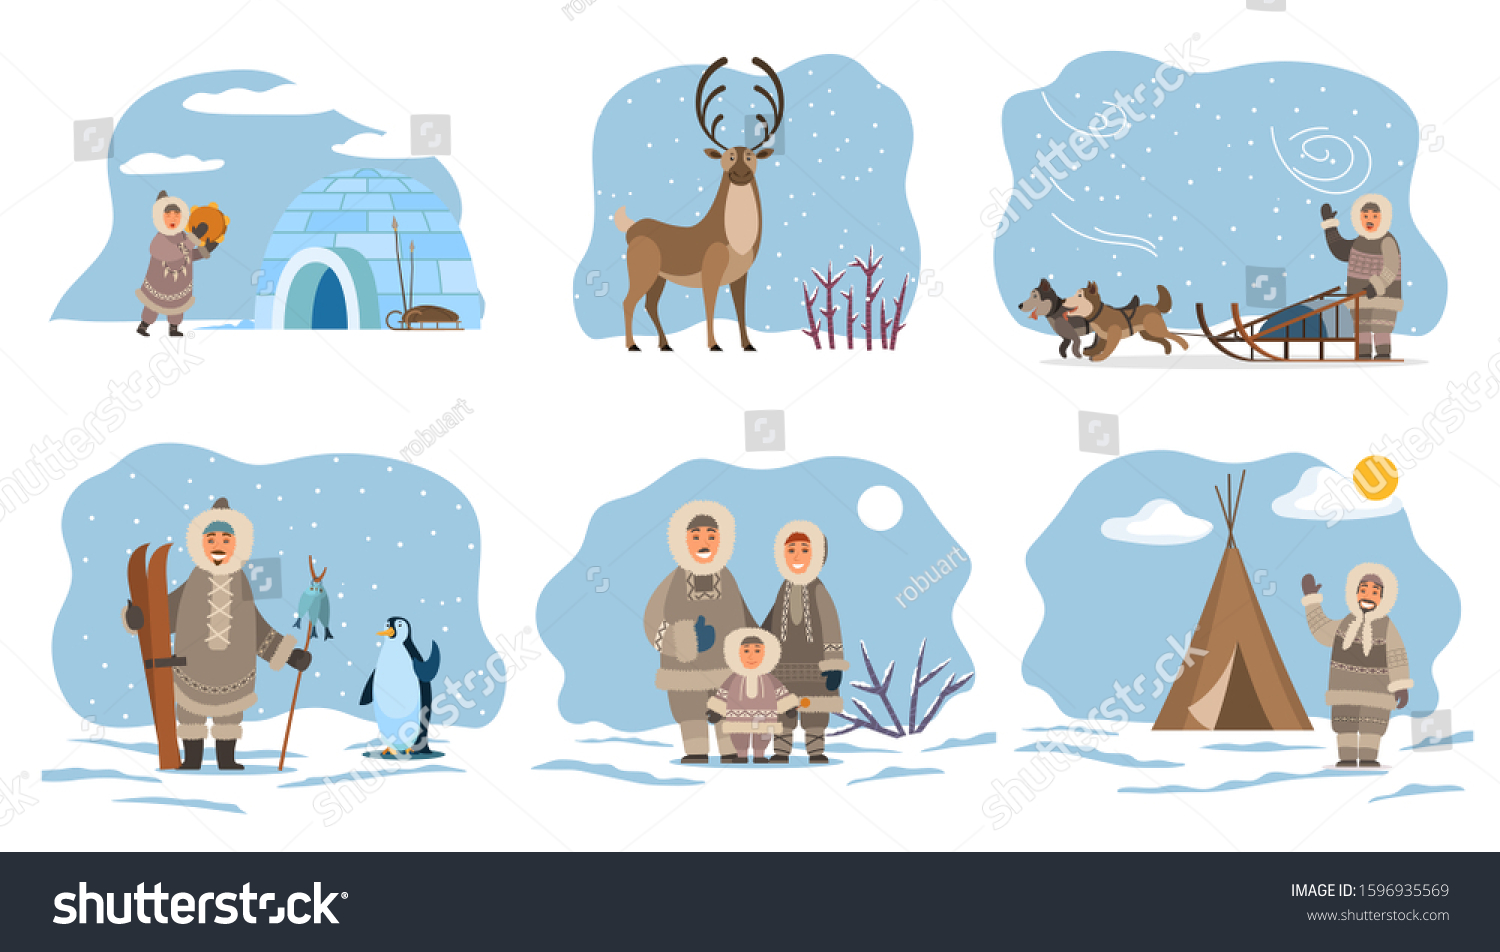 Collection of eskimos people by home made of ice. Igloo and inuit, male character with fish on stick and penguin. Deer with long horns, animal of north. Man with dogs on sleds, vector in flat #1596935569